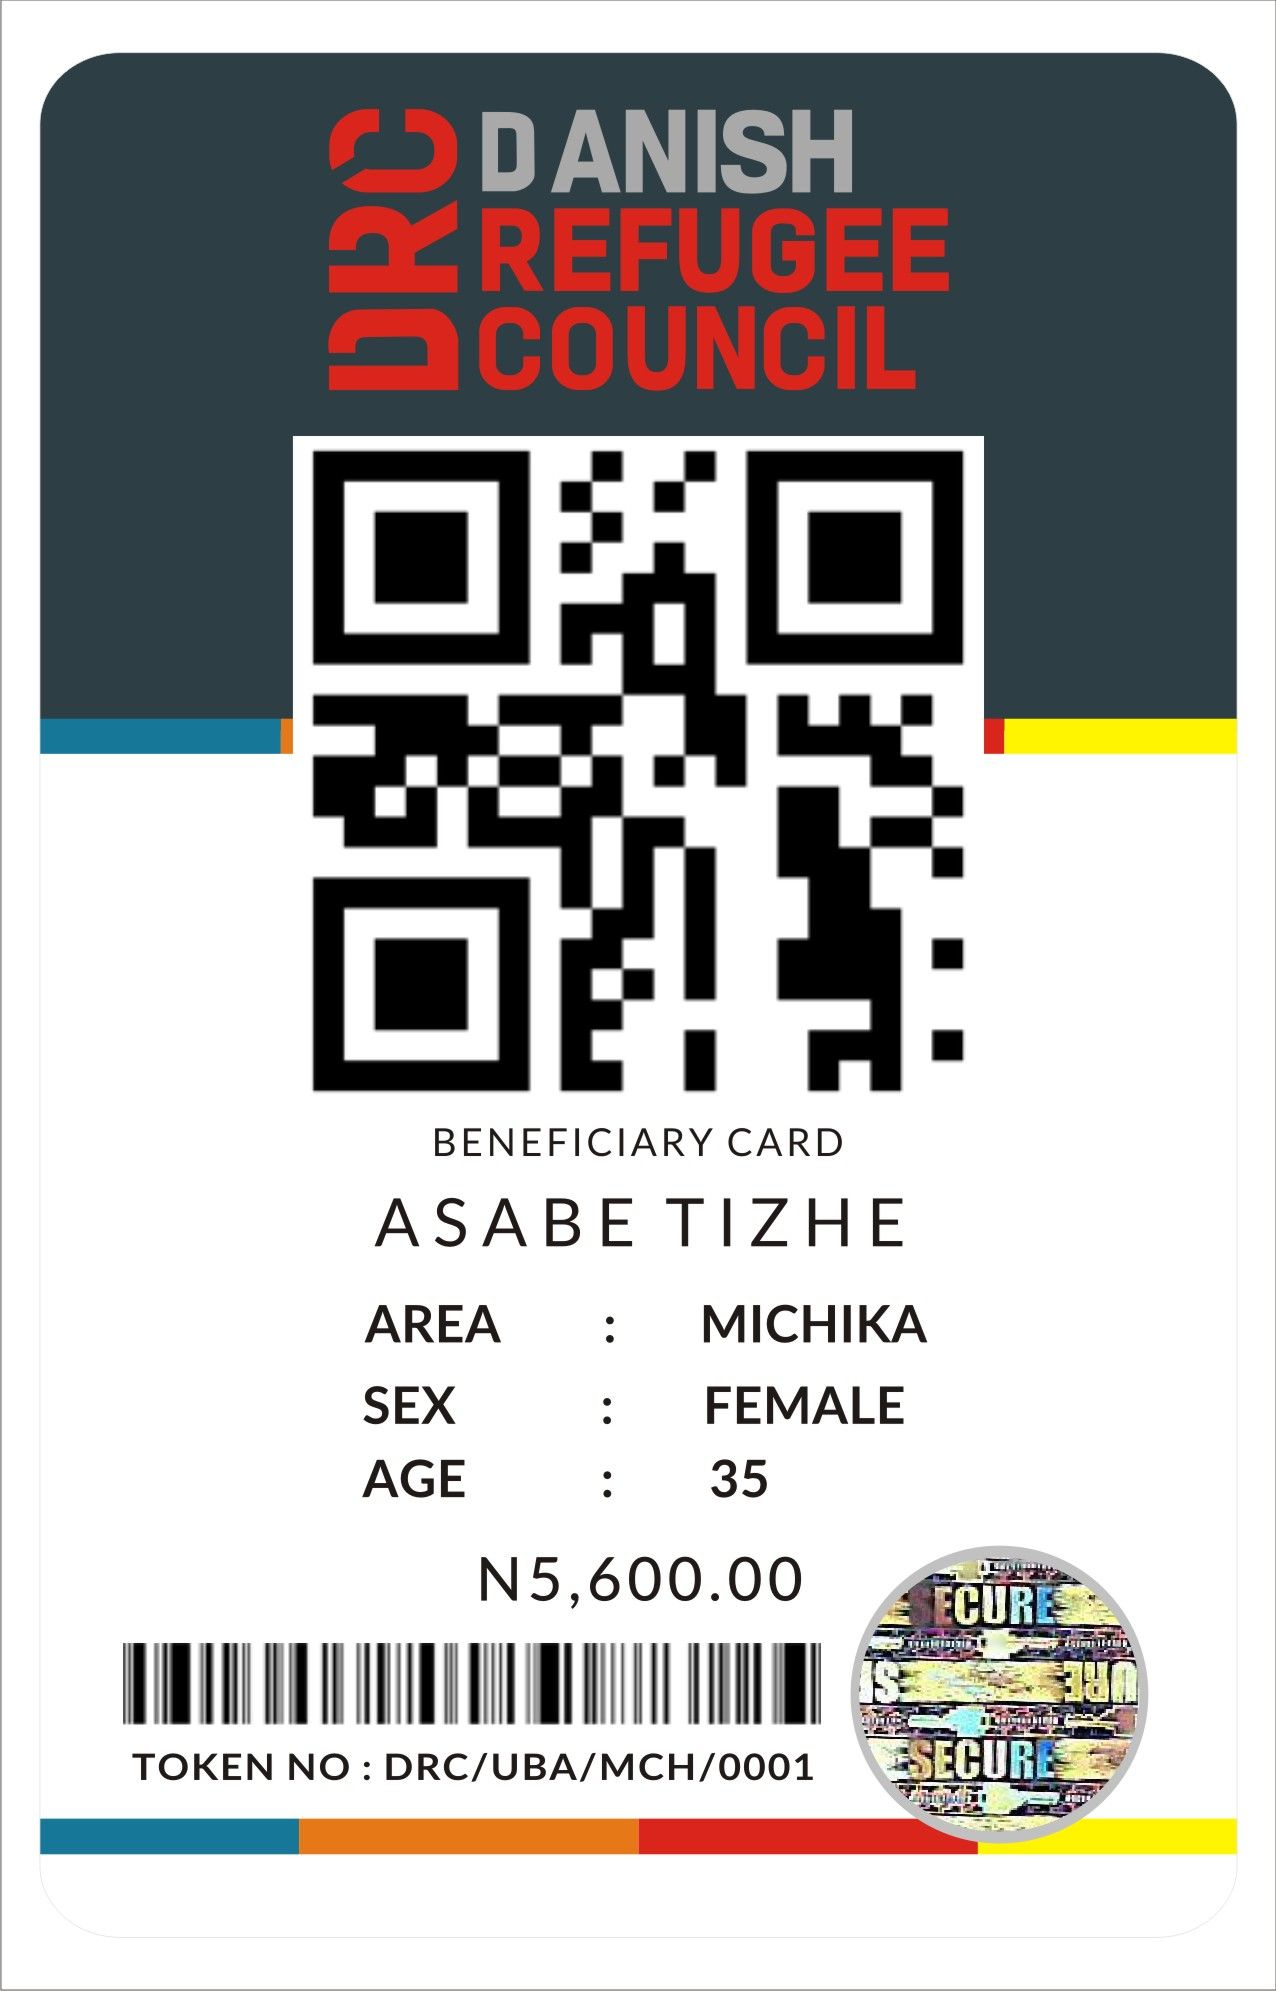 CONTACT CHINEDU ON 09022536974 TO PRINT PLASTIC CARDS